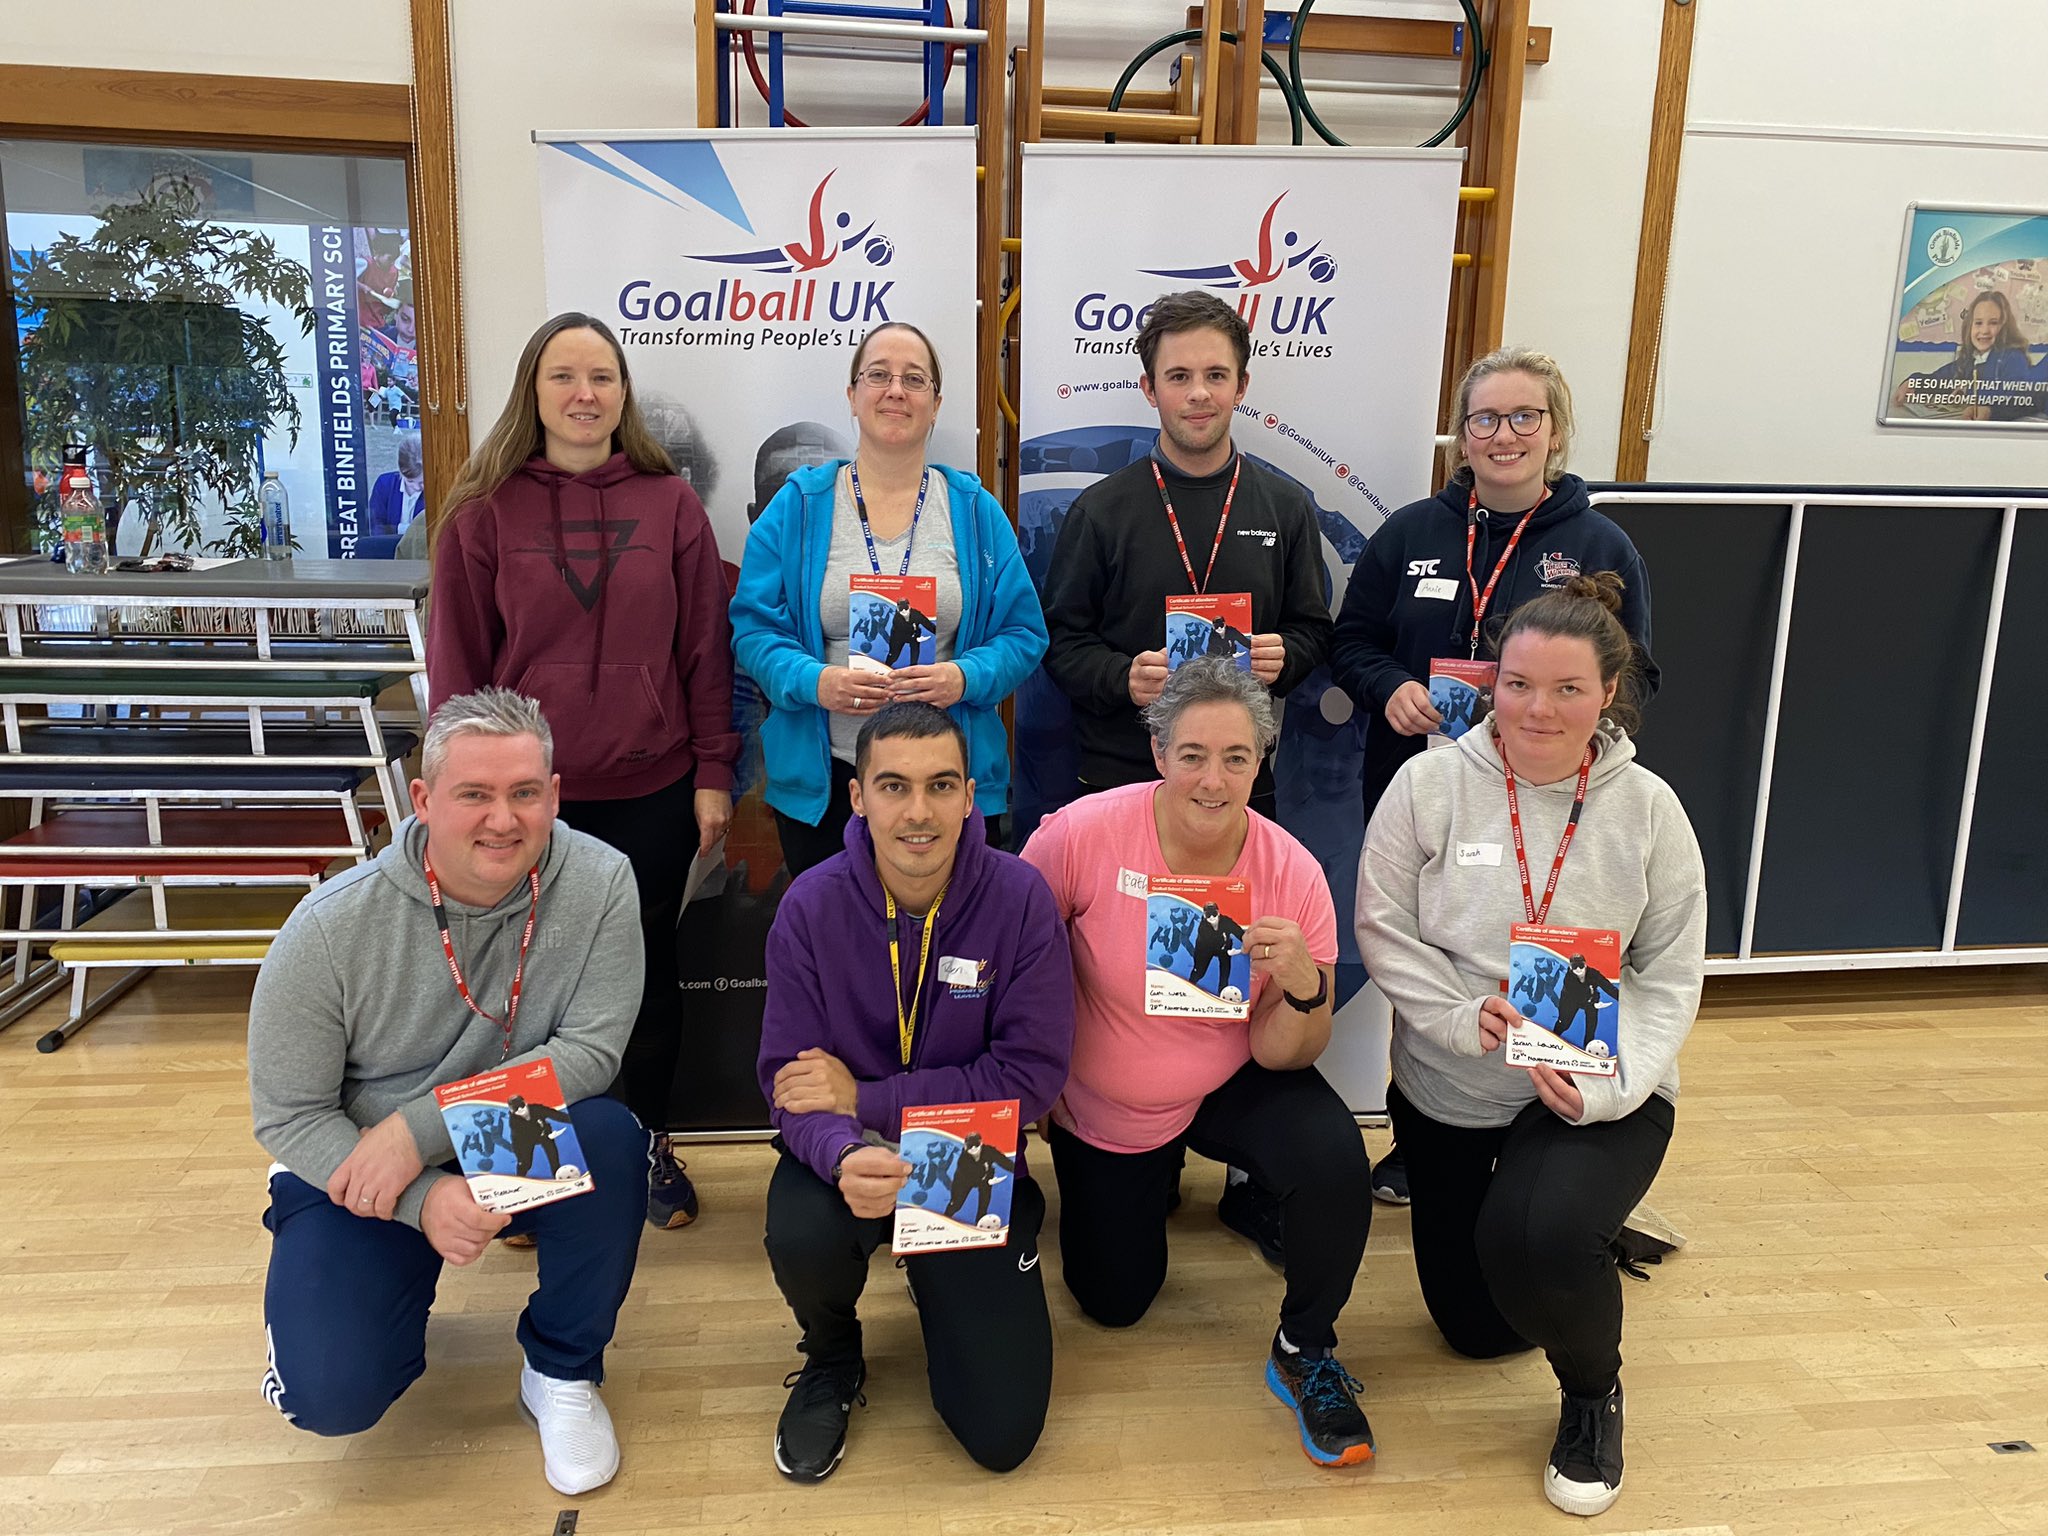 Group photo of the 8 candidates on the Hampshire Goalball School Leaders Course. The group are in two rows of four, with the front row knelt down, smiling and holding their certificates. The group is also stood in front of two Goalball UK logo banners.